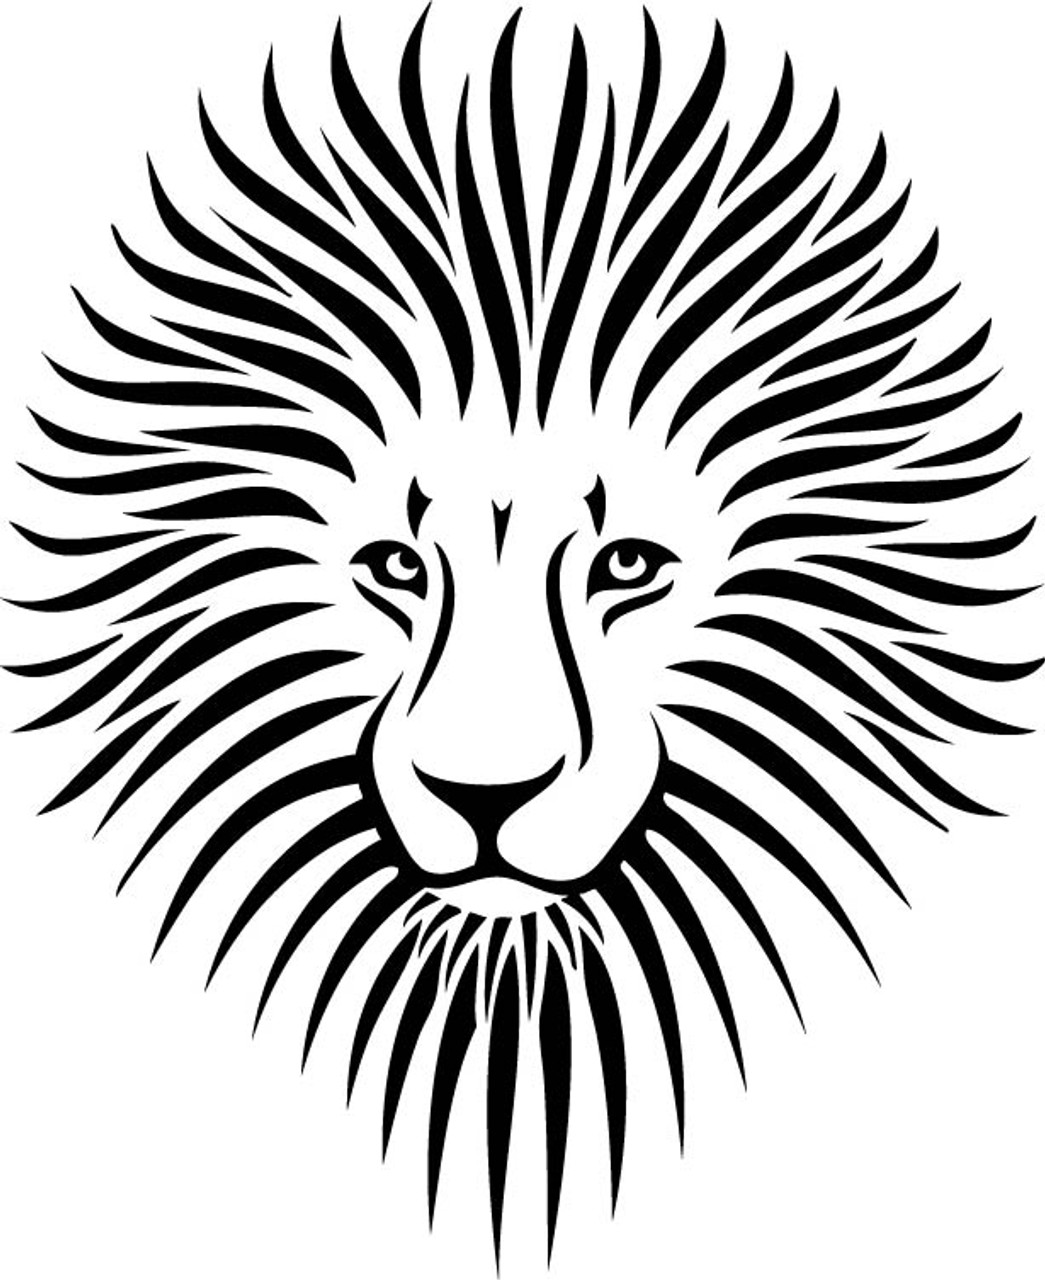 Animal Car Decals - Car Stickers | Lion Car Decal 05 | AnyDecals.com